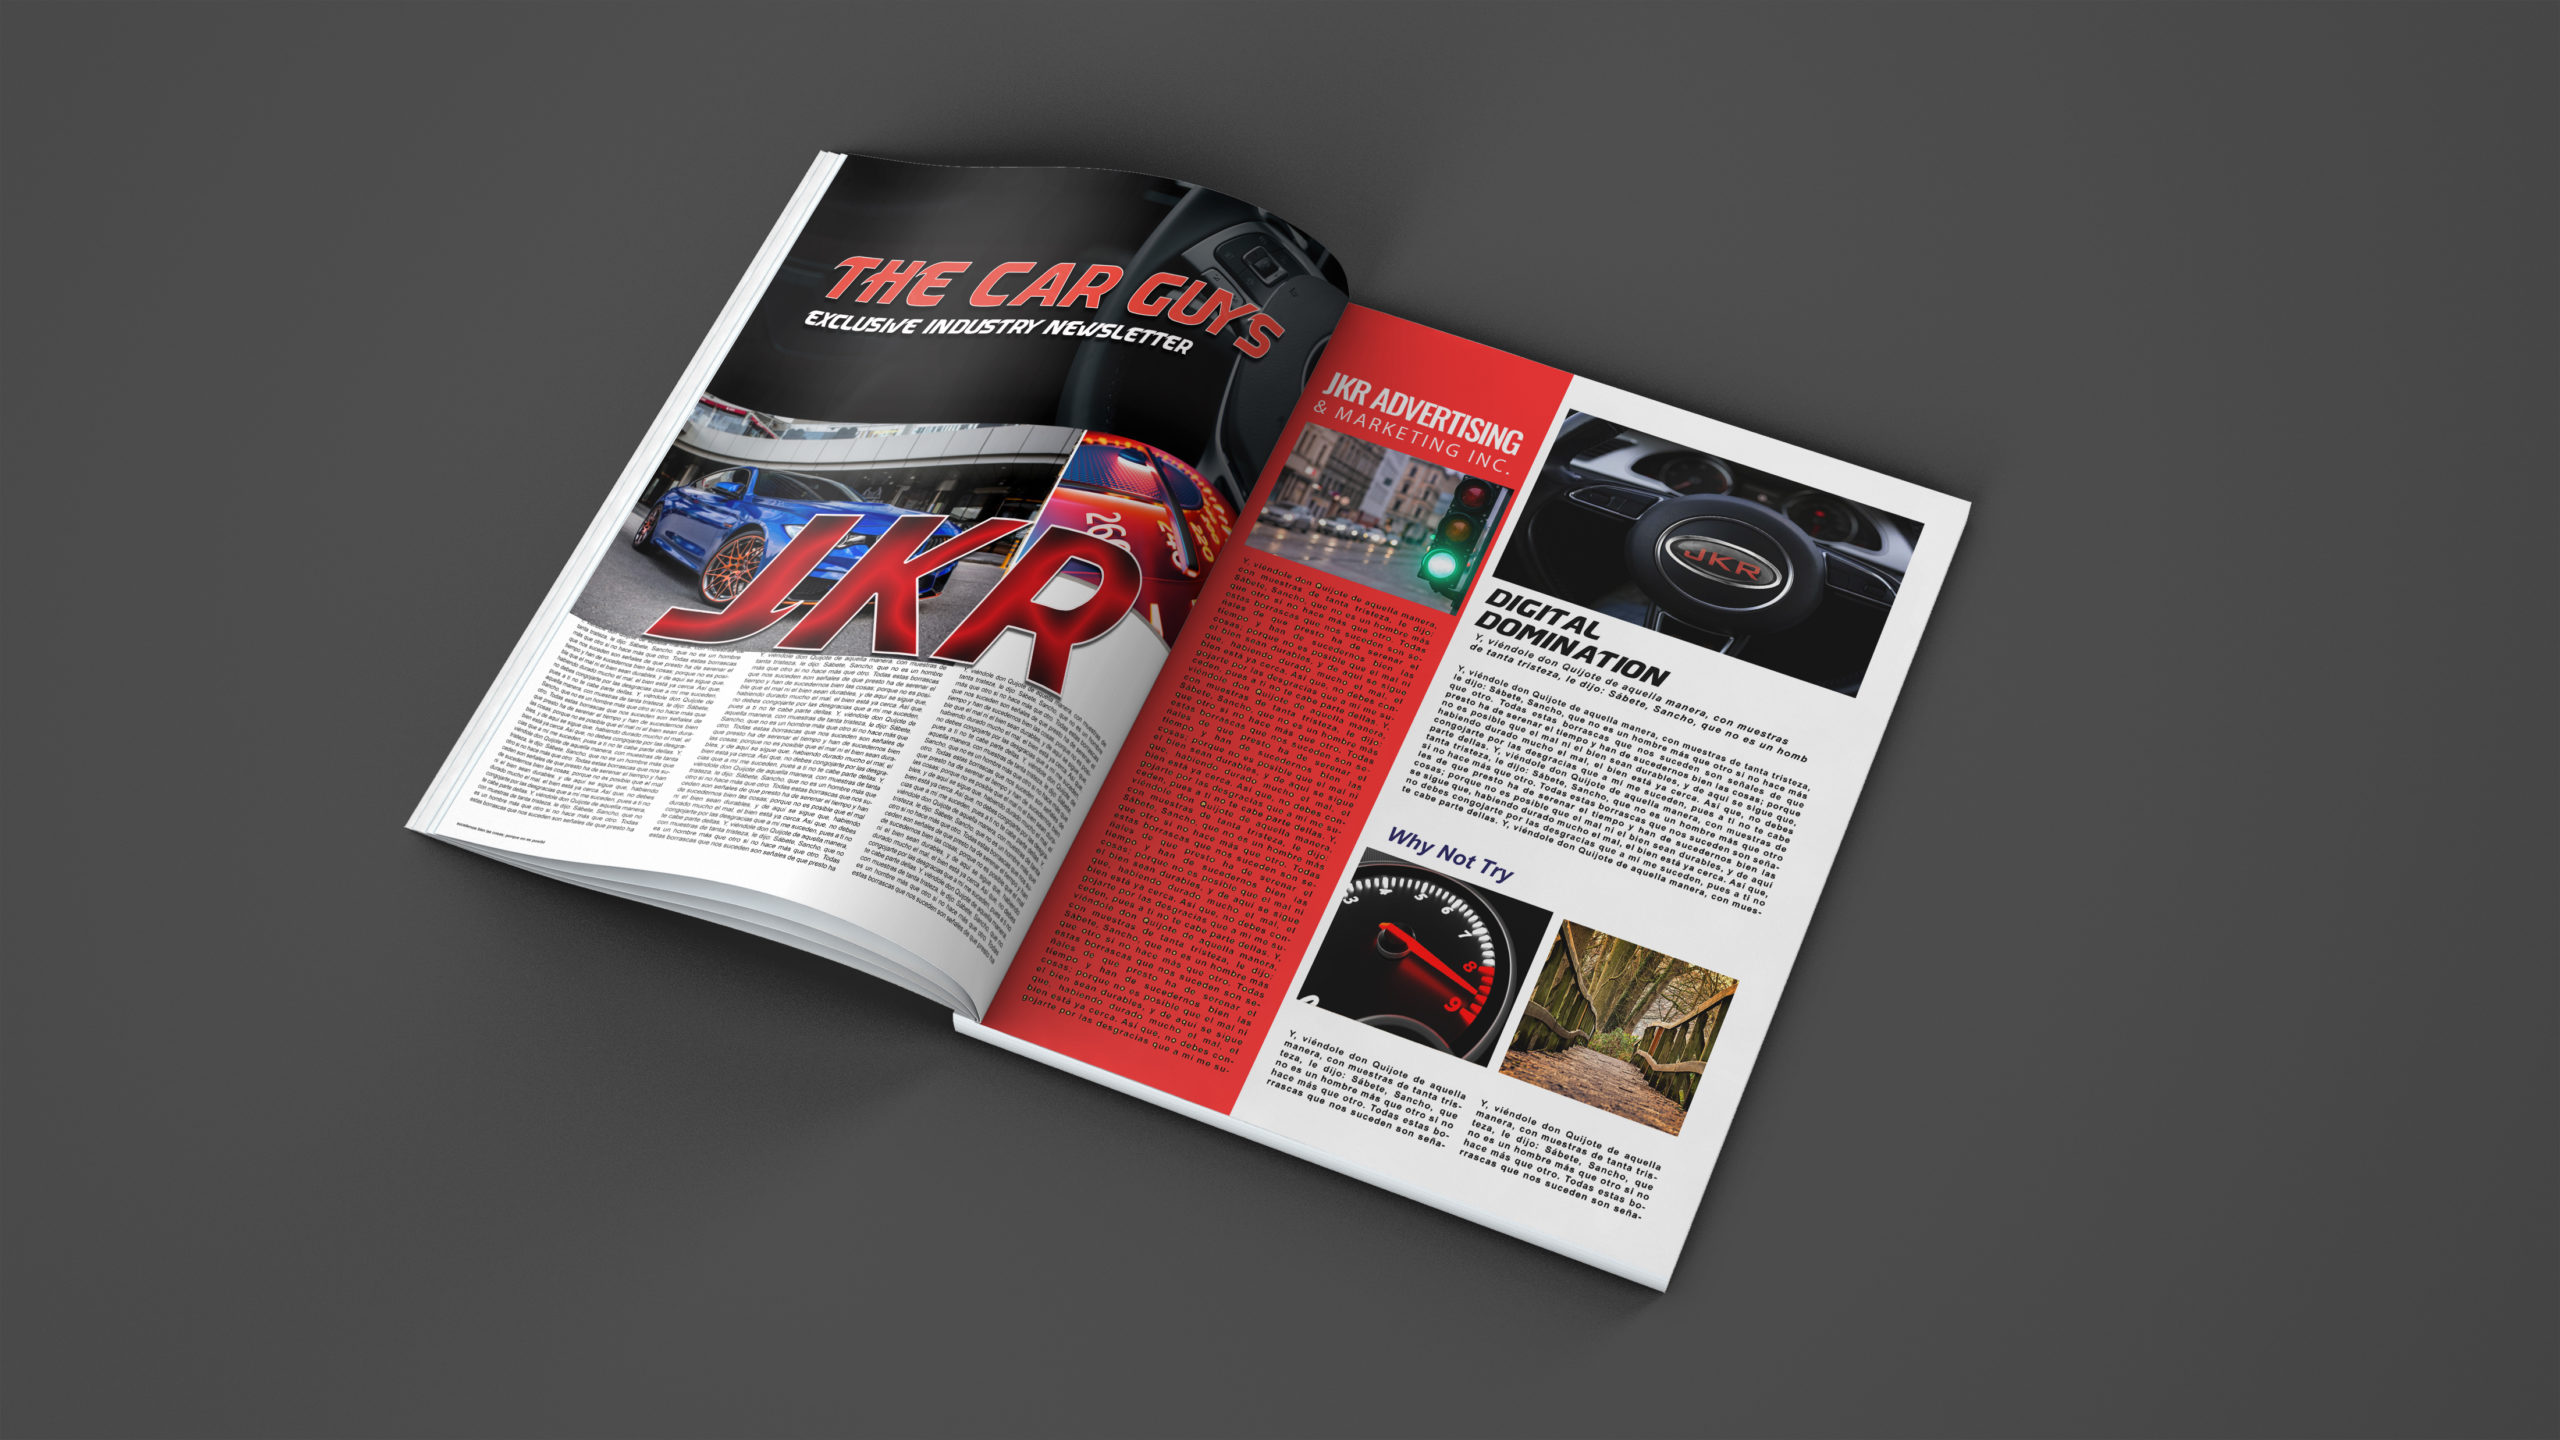 Introducing “The Car Guys” Exclusive Insider Newsletter from JKR. Get Tips, Tricks, & Big News in the Industry!